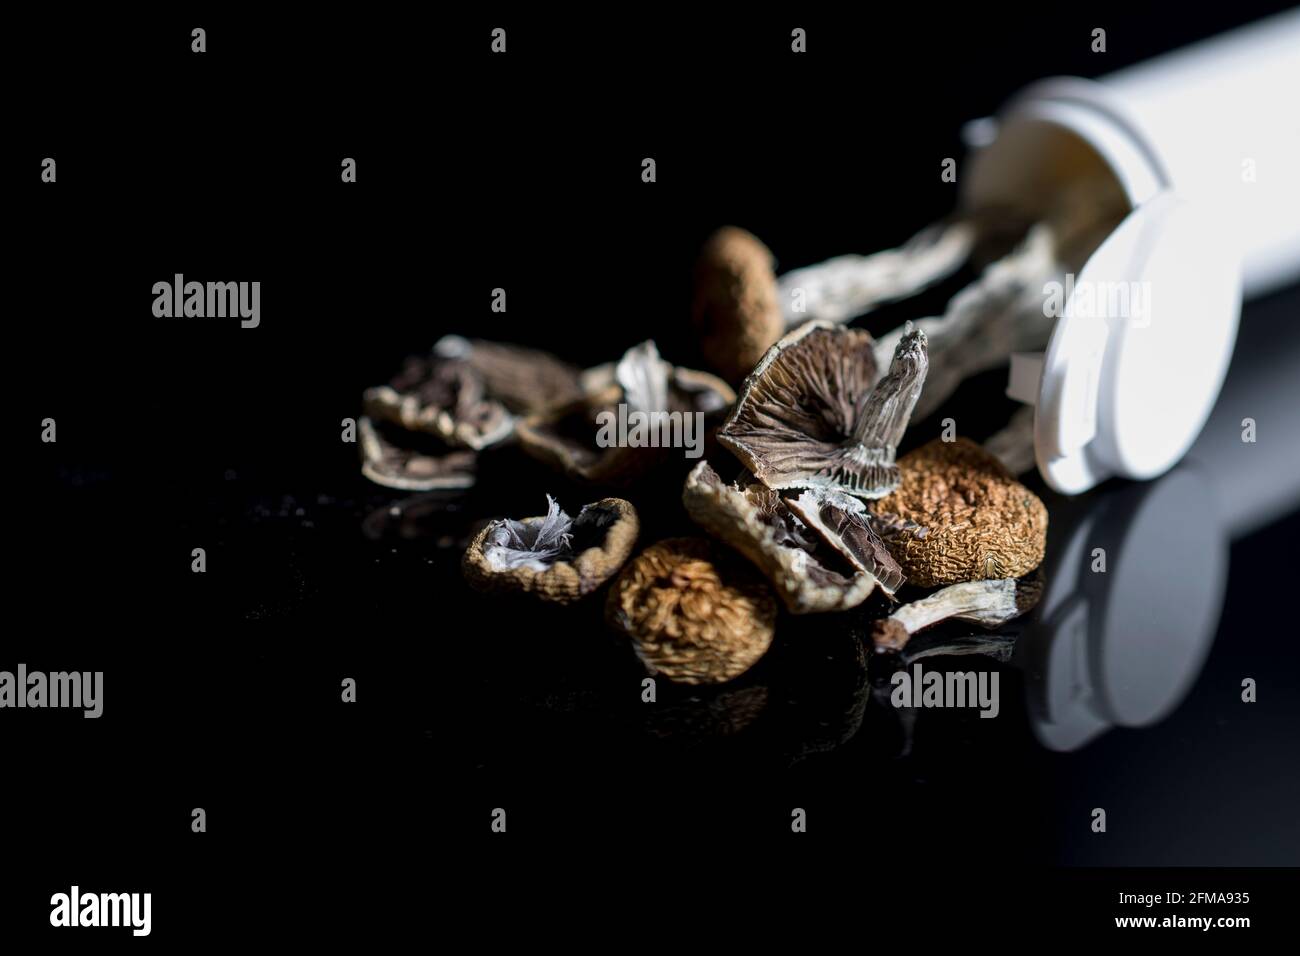 PTSD psychotherapy medical mushrooms psychedelic-assisted therapy. Dried magic mushrooms containing psilocybin. Stock Photo